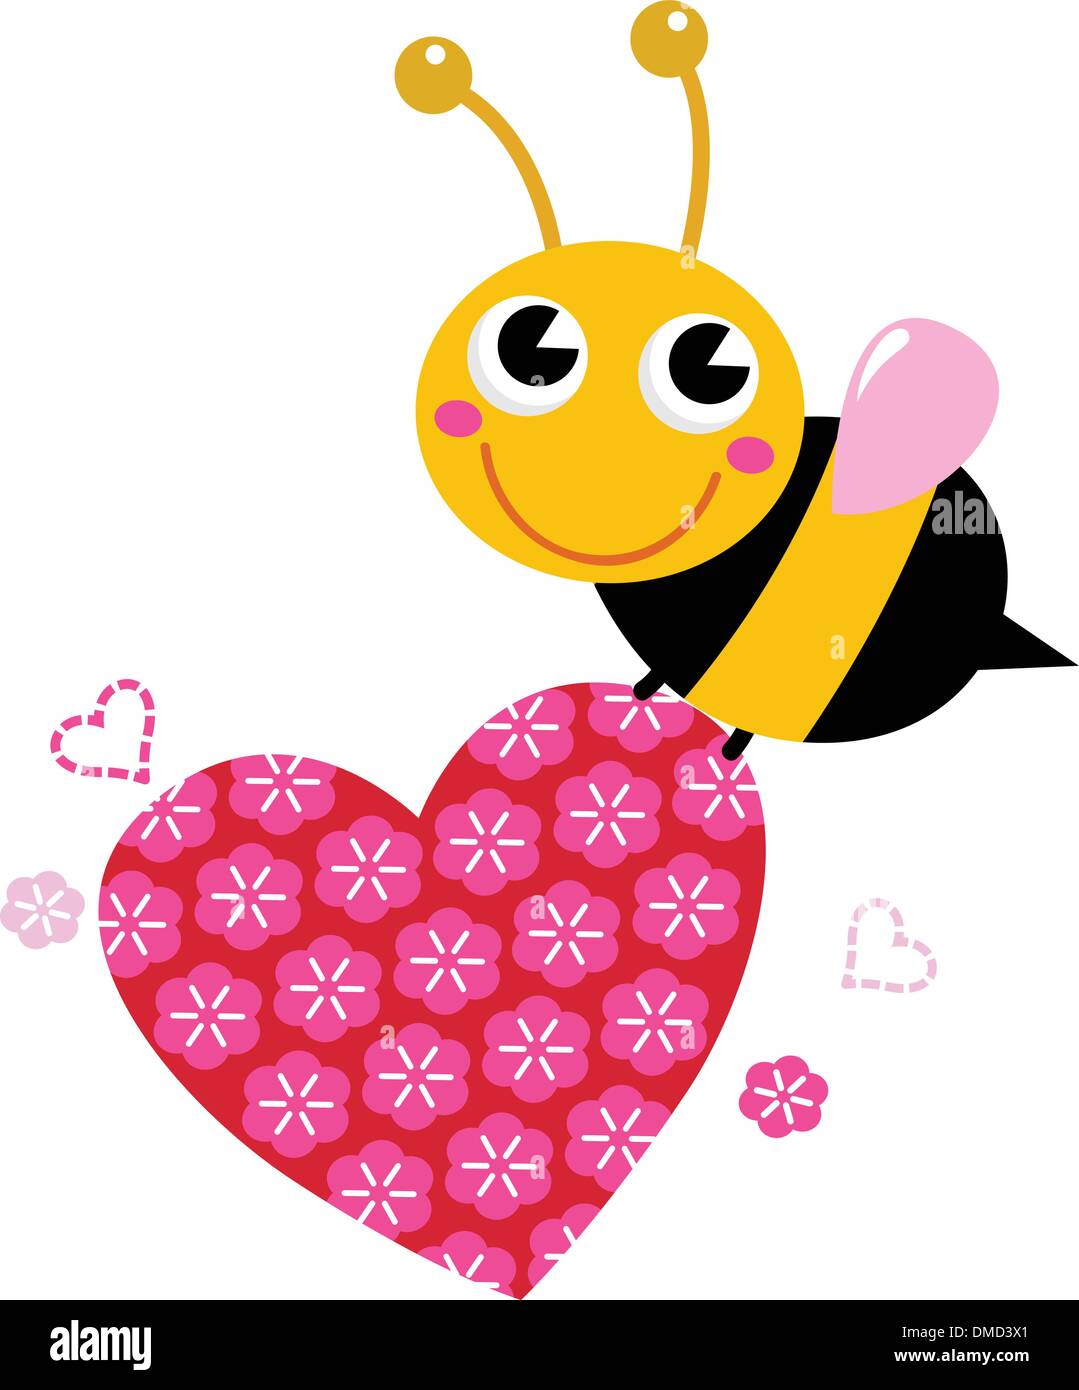 https://c8.alamy.com/comp/DMD3X1/cute-flying-bee-with-pink-love-heart-isolated-on-white-DMD3X1.jpg